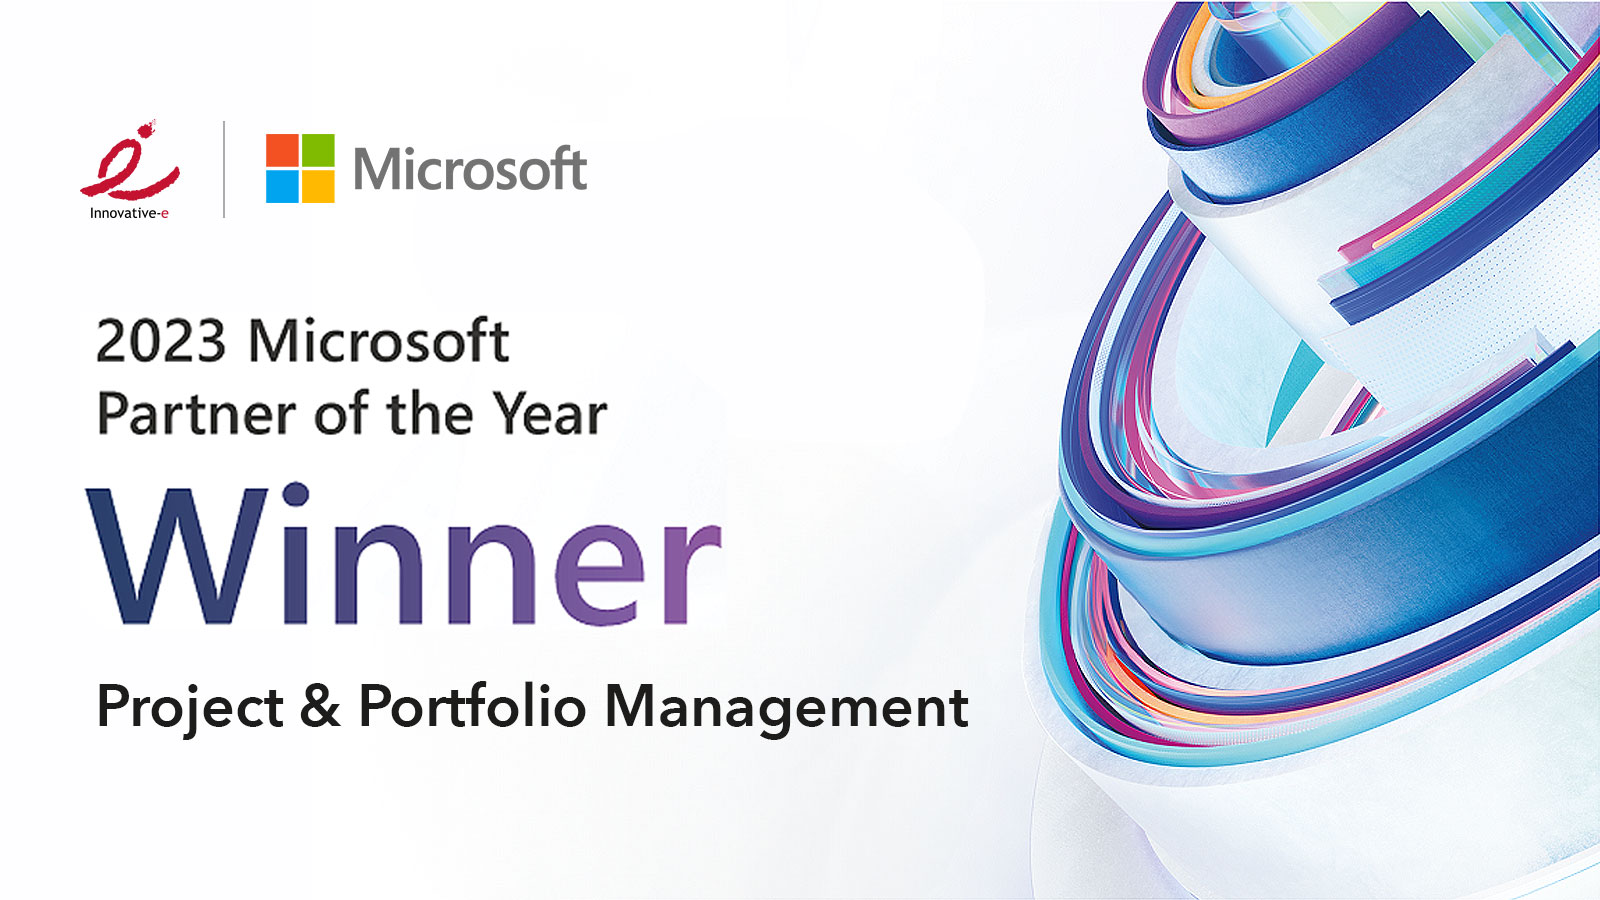 Microsoft 2023 Partner of the Year